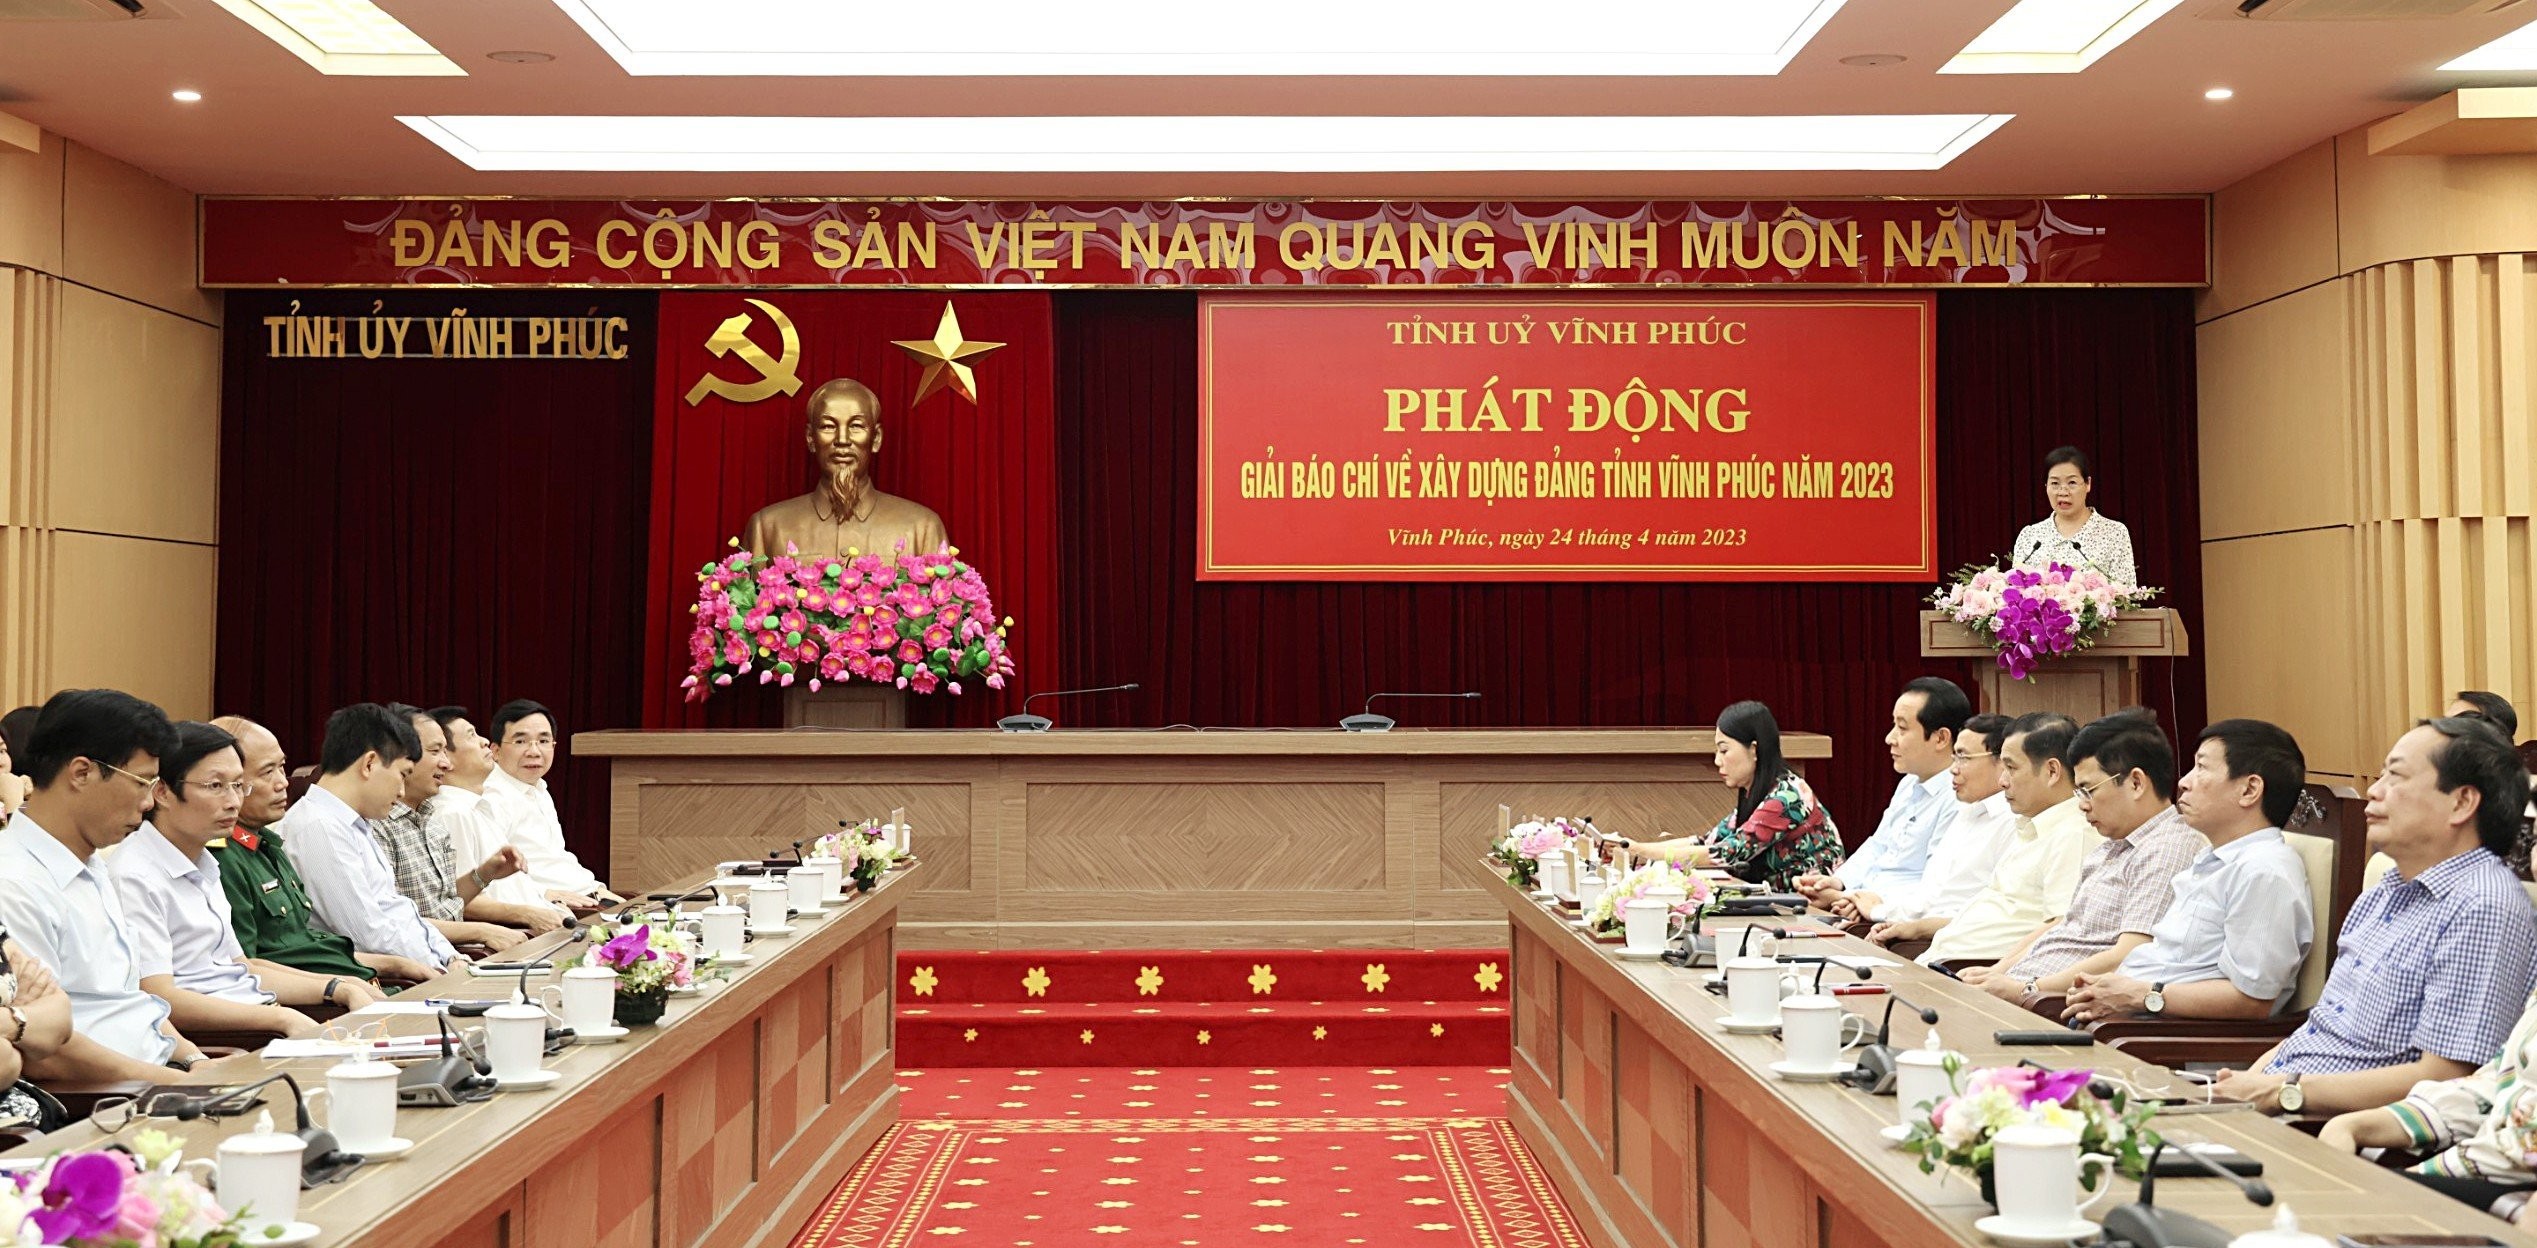 quang-canh-buoi-le-phat-dong-1682326099.jpg